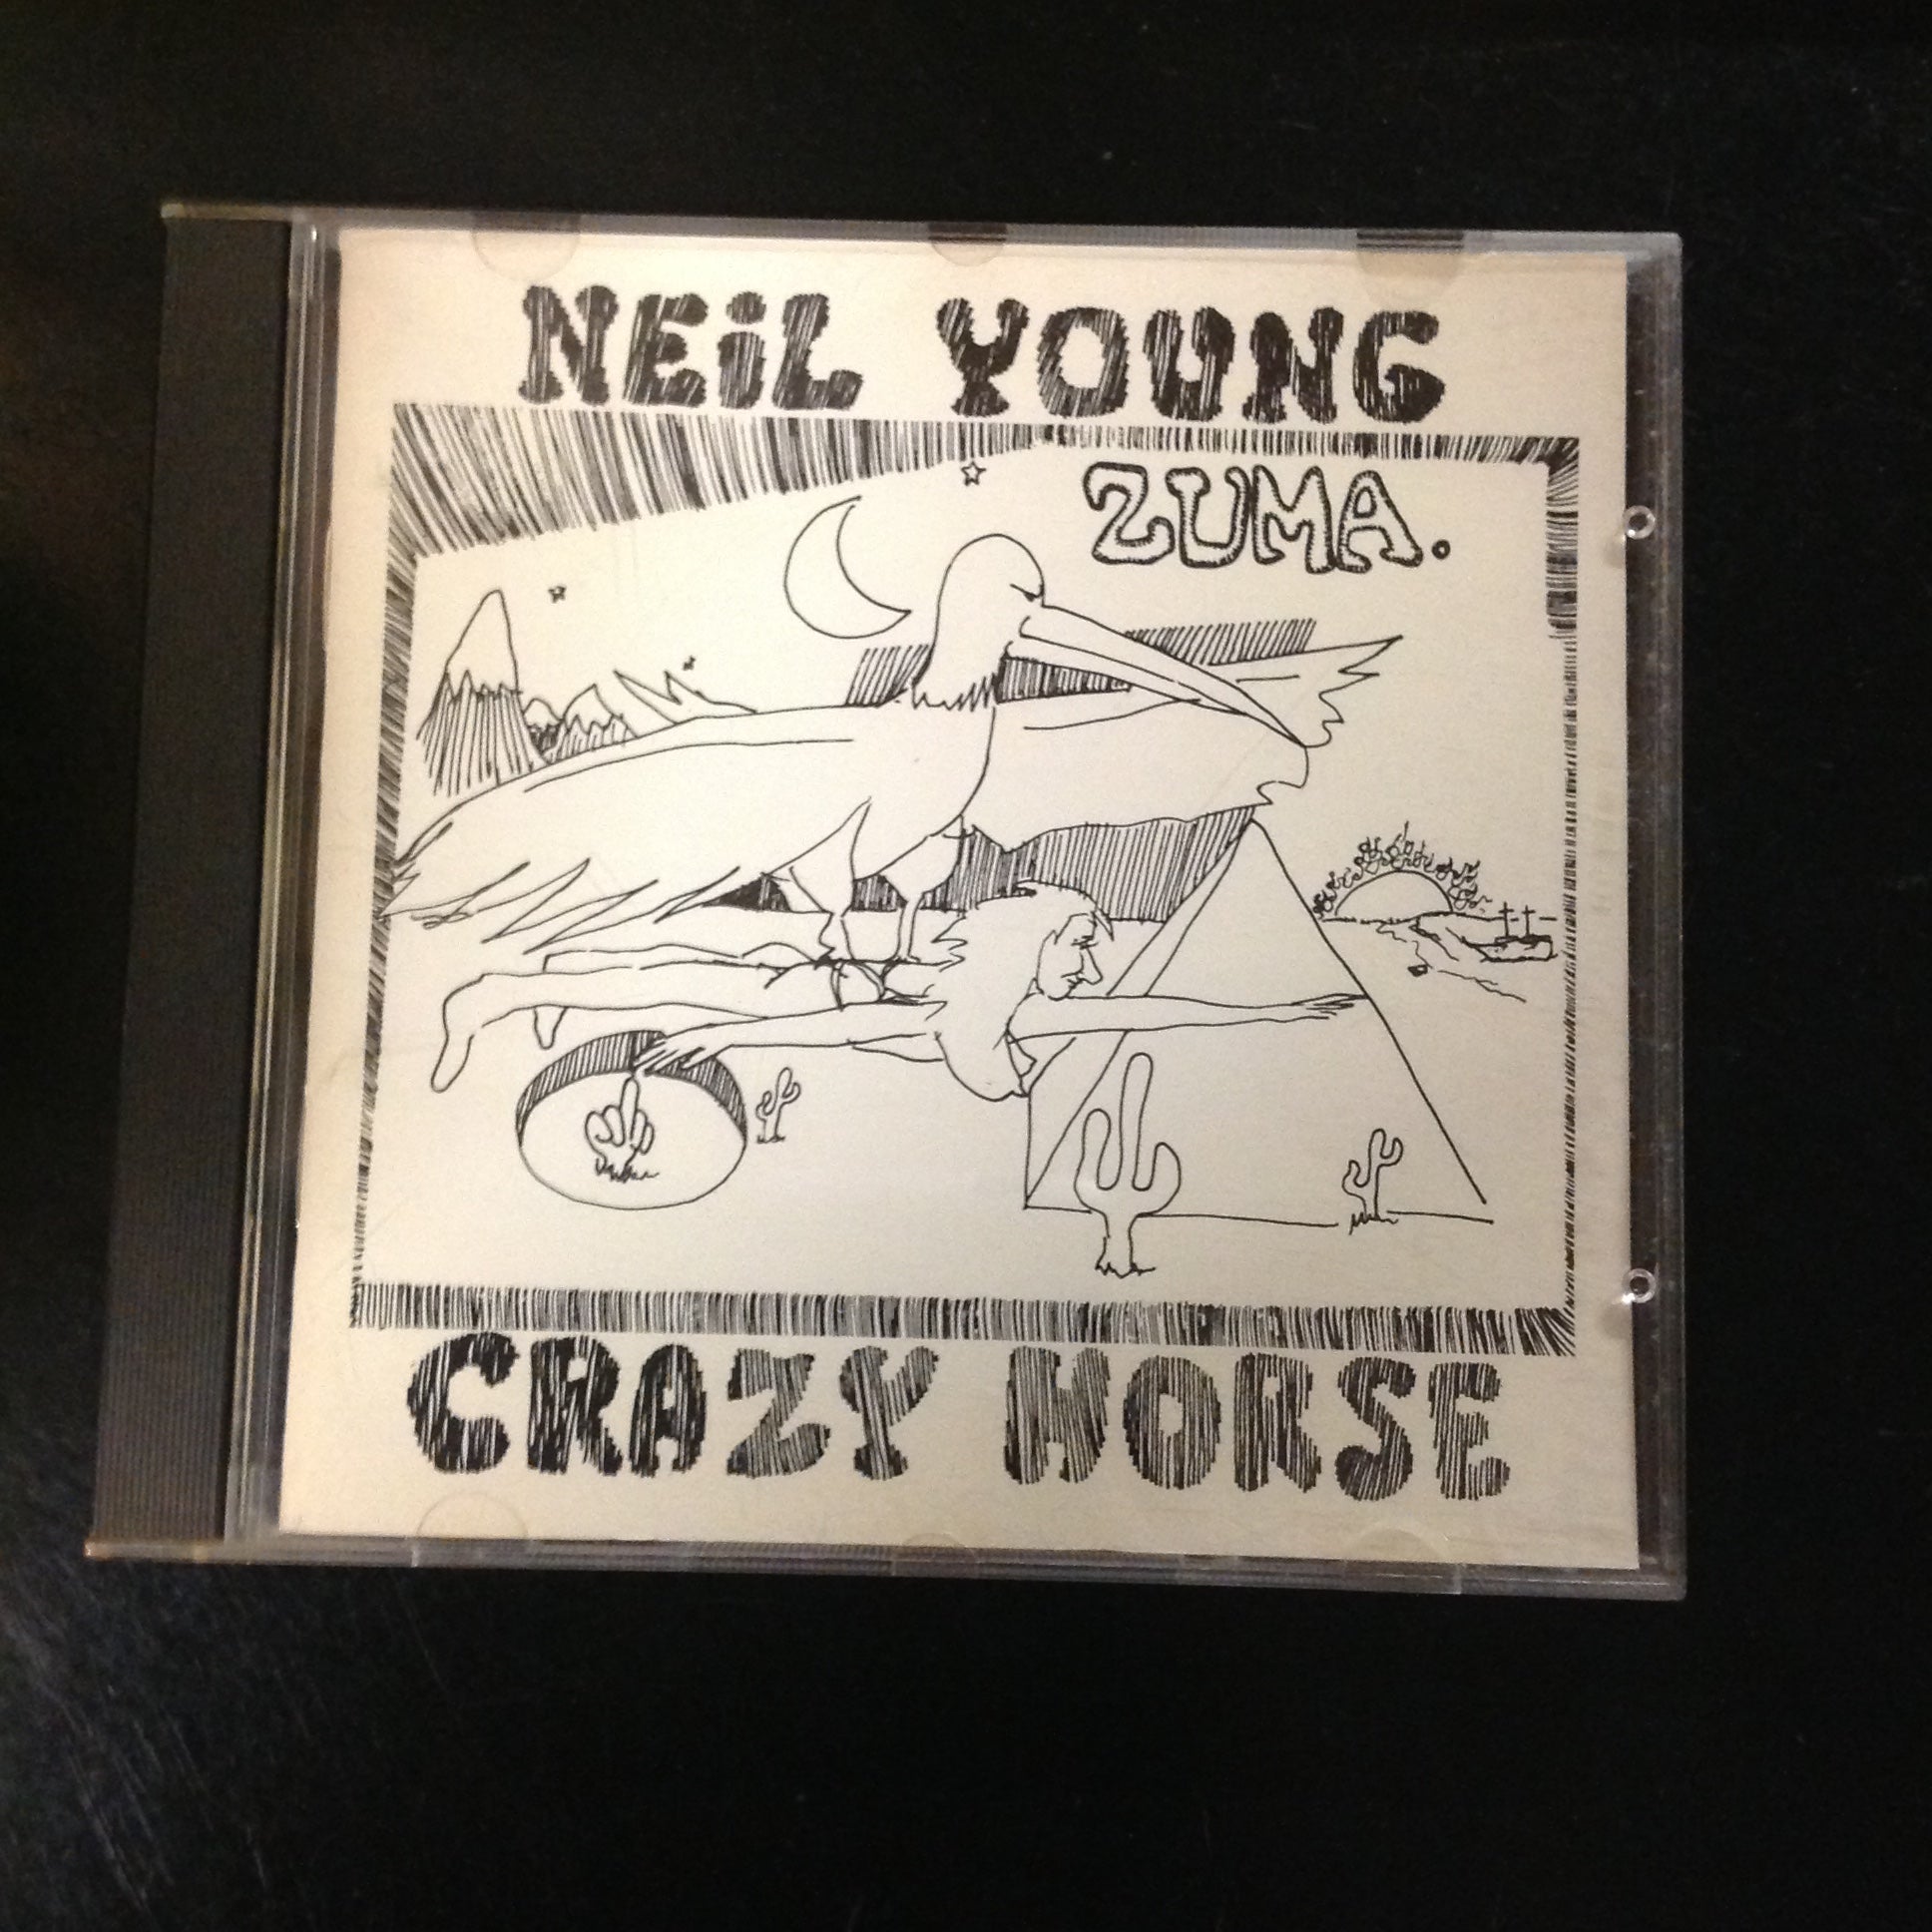 CD Neil Young With Crazy Horse Zuma 2242-2 Reprise